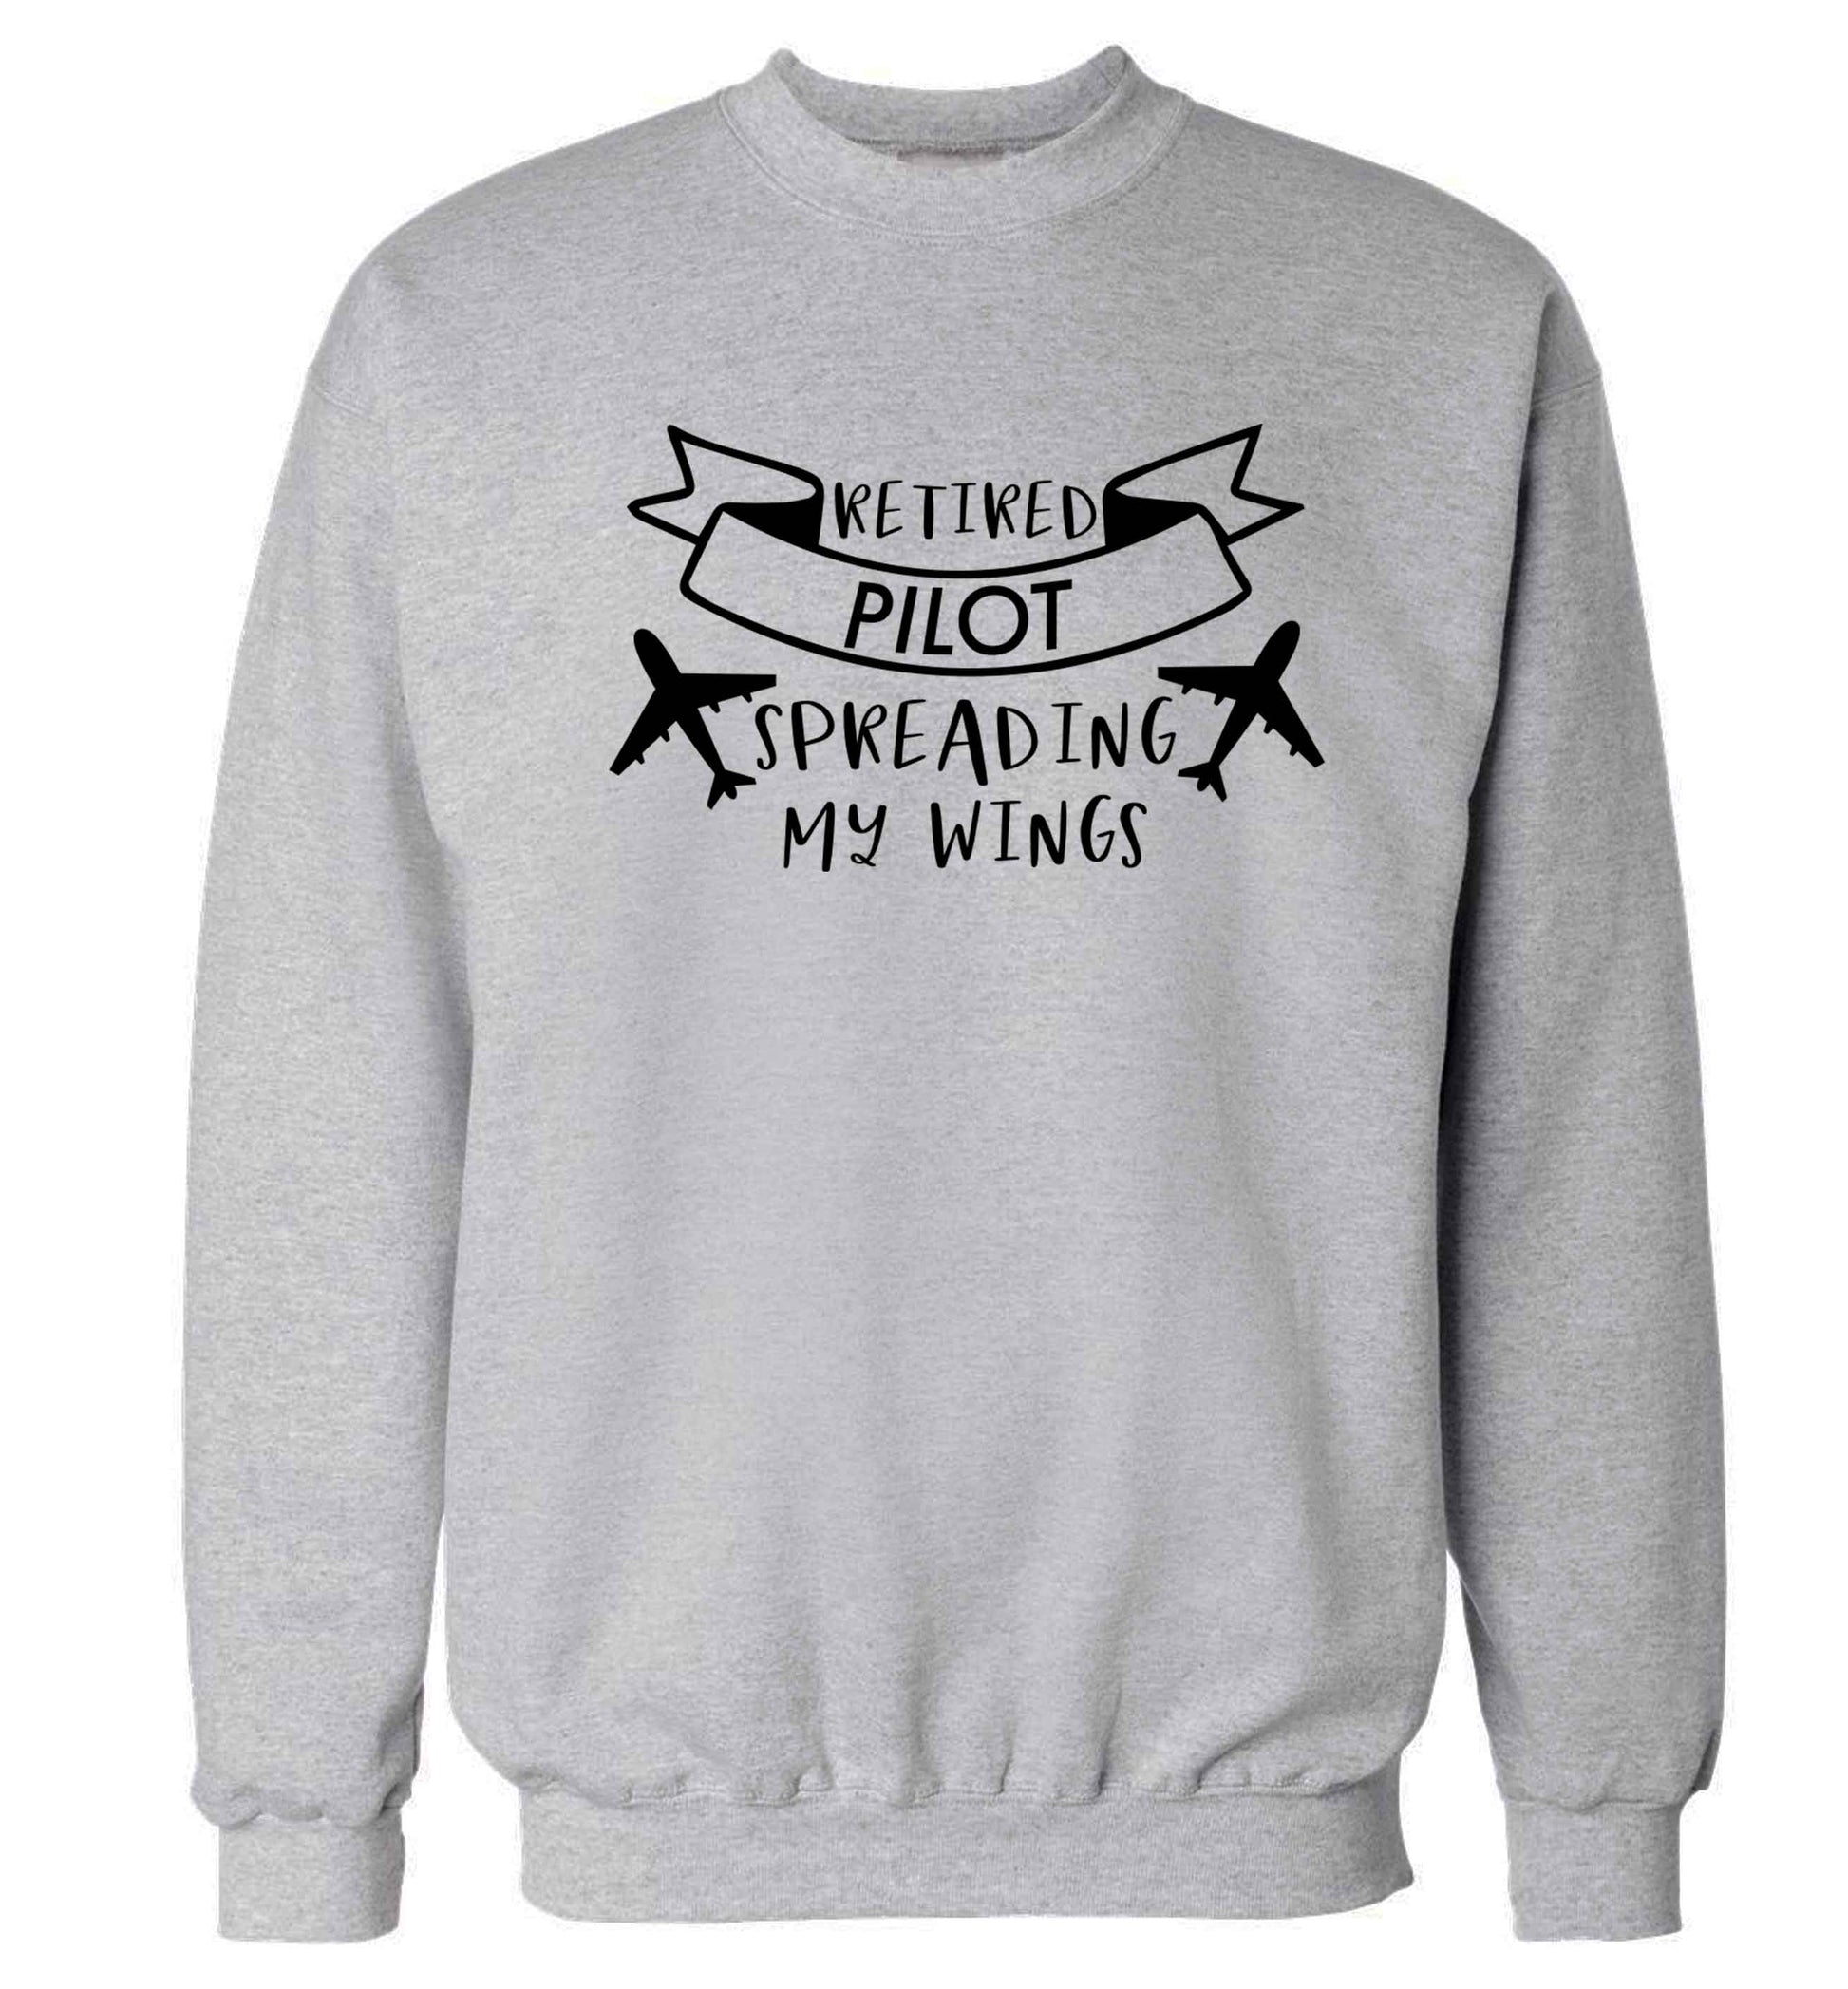 Retired pilot spreading my wings Adult's unisex grey Sweater 2XL